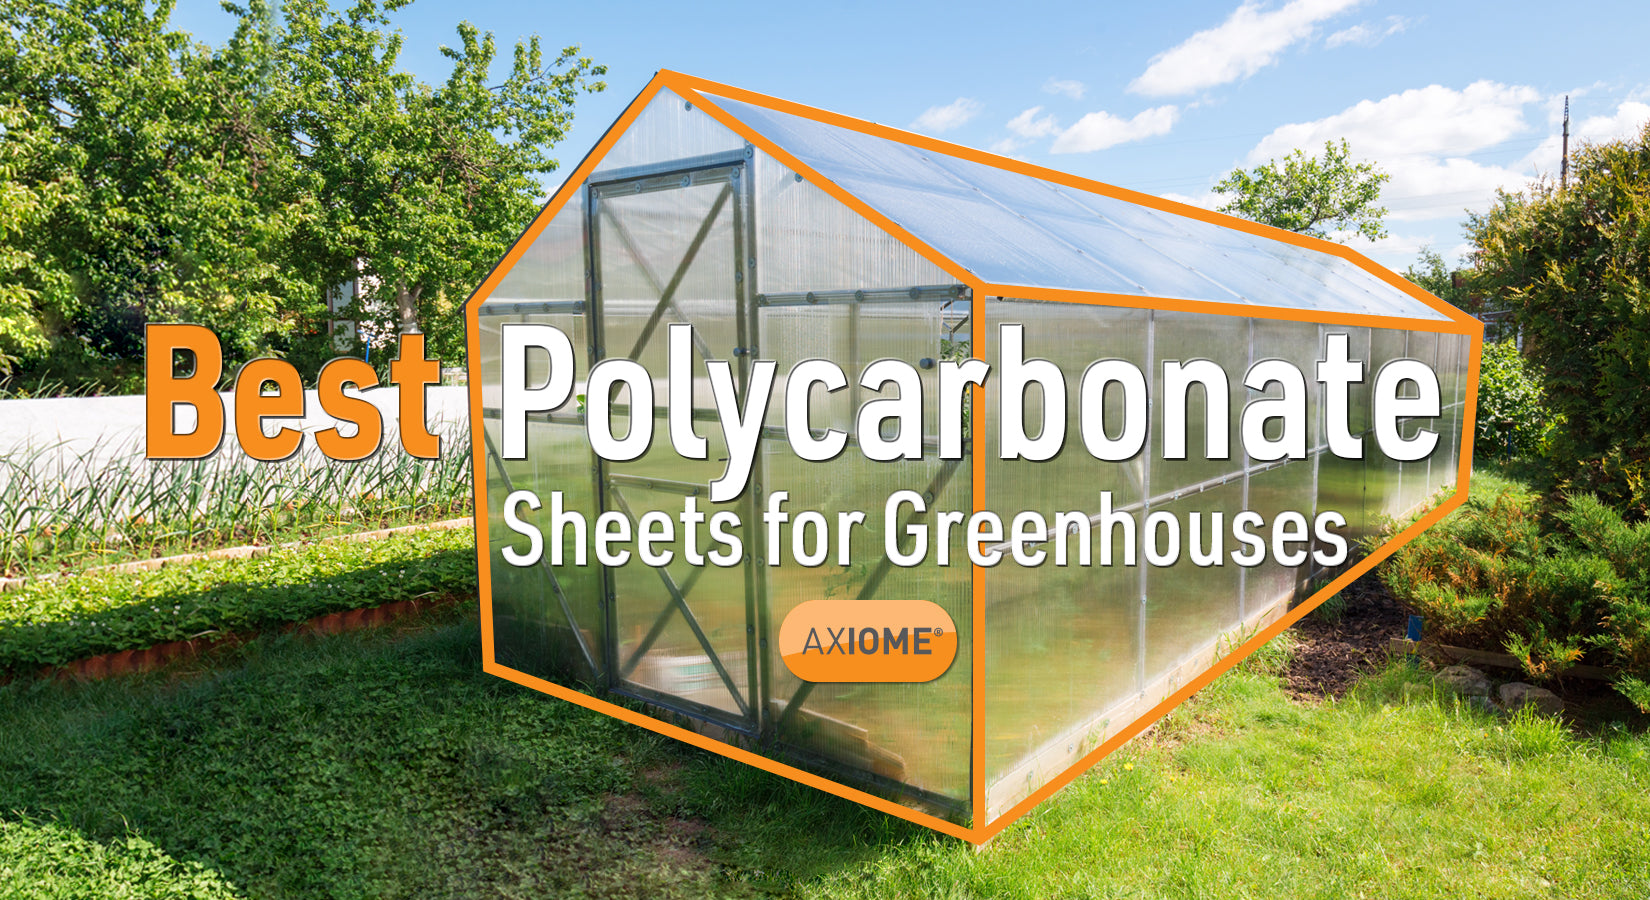 Polycarbonate Sheet: Get Any Special Polycarbonate Panel for Your  Application